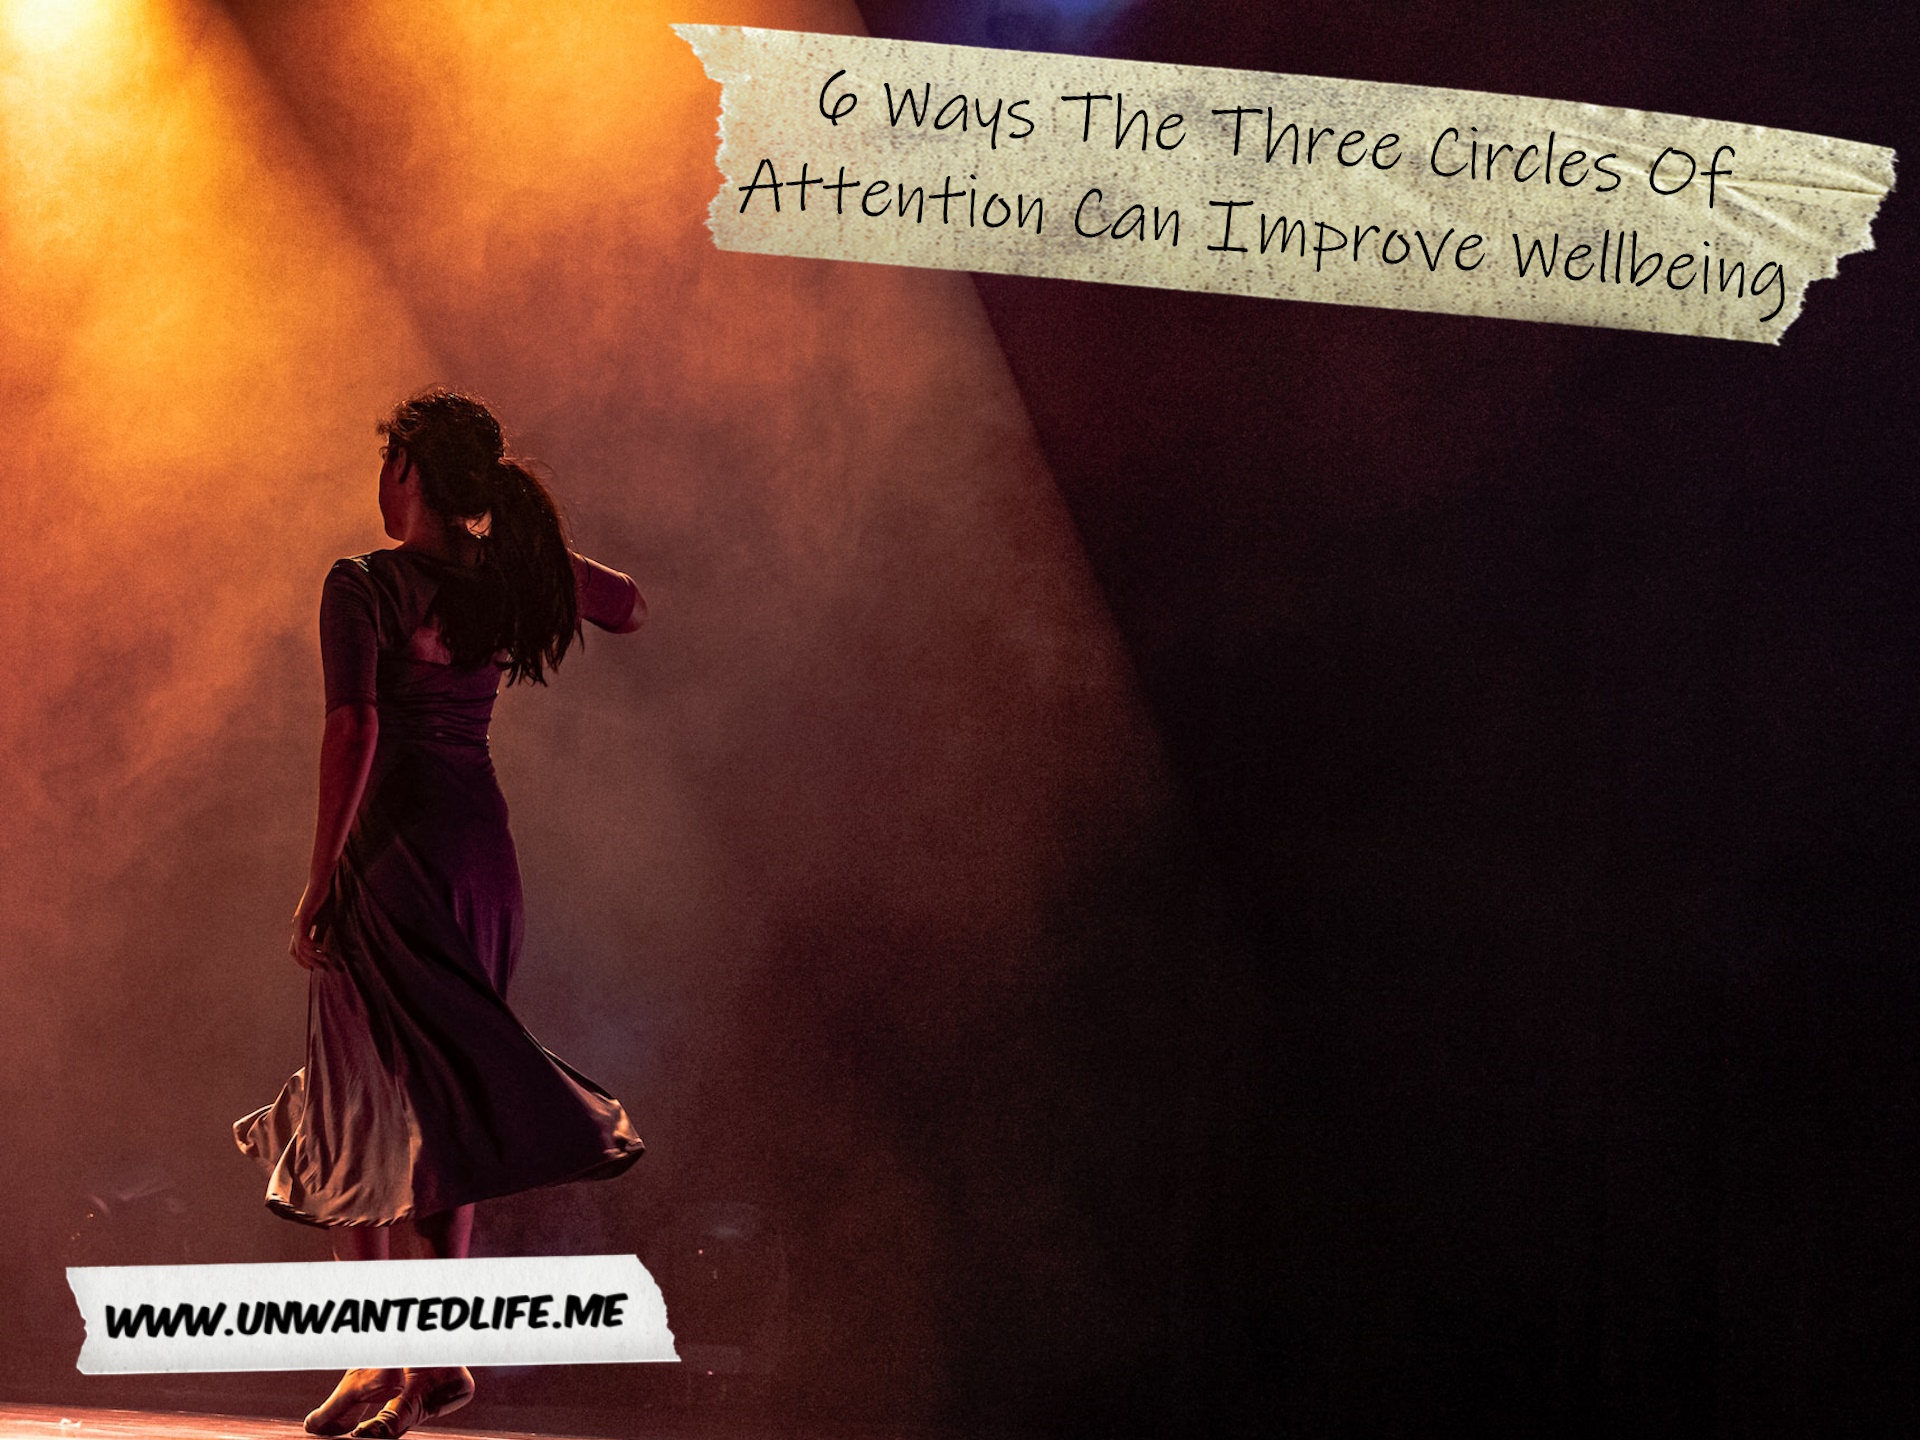 A photo of a woman standing on a dark stage lit up by a spotlight to represent the topic of the article - 6 Ways The Three Circles Of Attention Can Improve Wellbeing